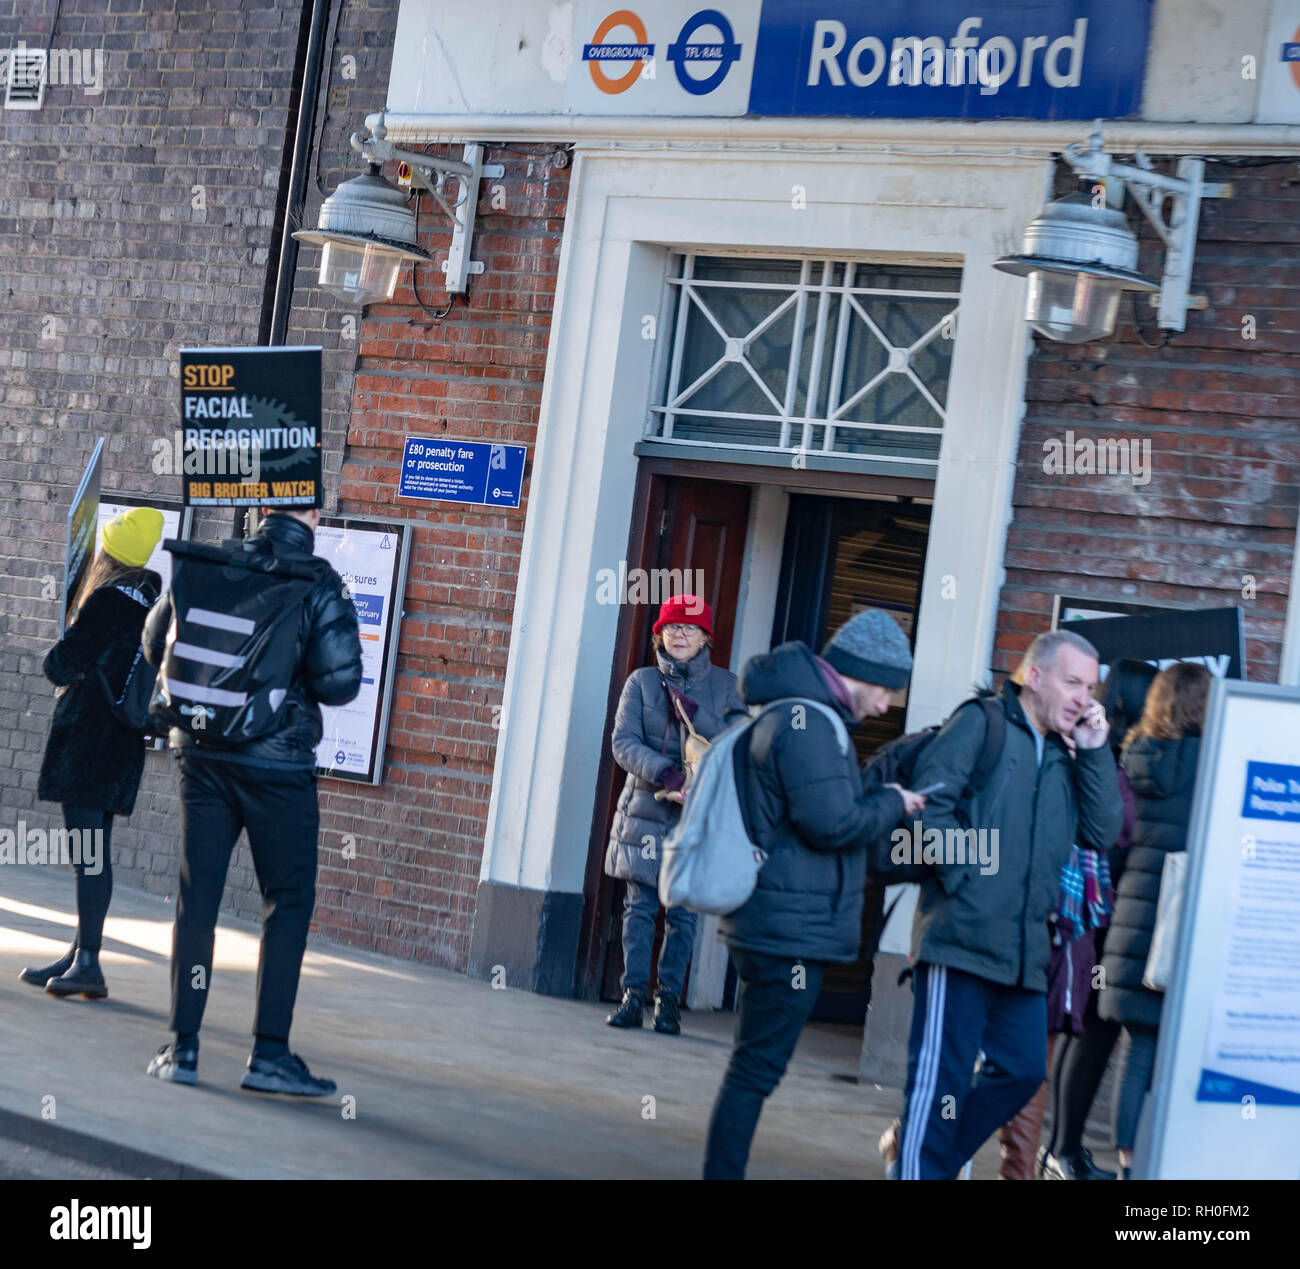 Romford, Essex, UK. 31st January 2019 Metropolitan Police trial live Facial recognition technology outside Romford Station. The police cameras scan passers by and check them against a 'watch list' in real time allowing them to apprehend any wanted people. A small number of protesters against the scheme protested outside Romford Station. Credit: Ian Davidson/Alamy Live News Stock Photo